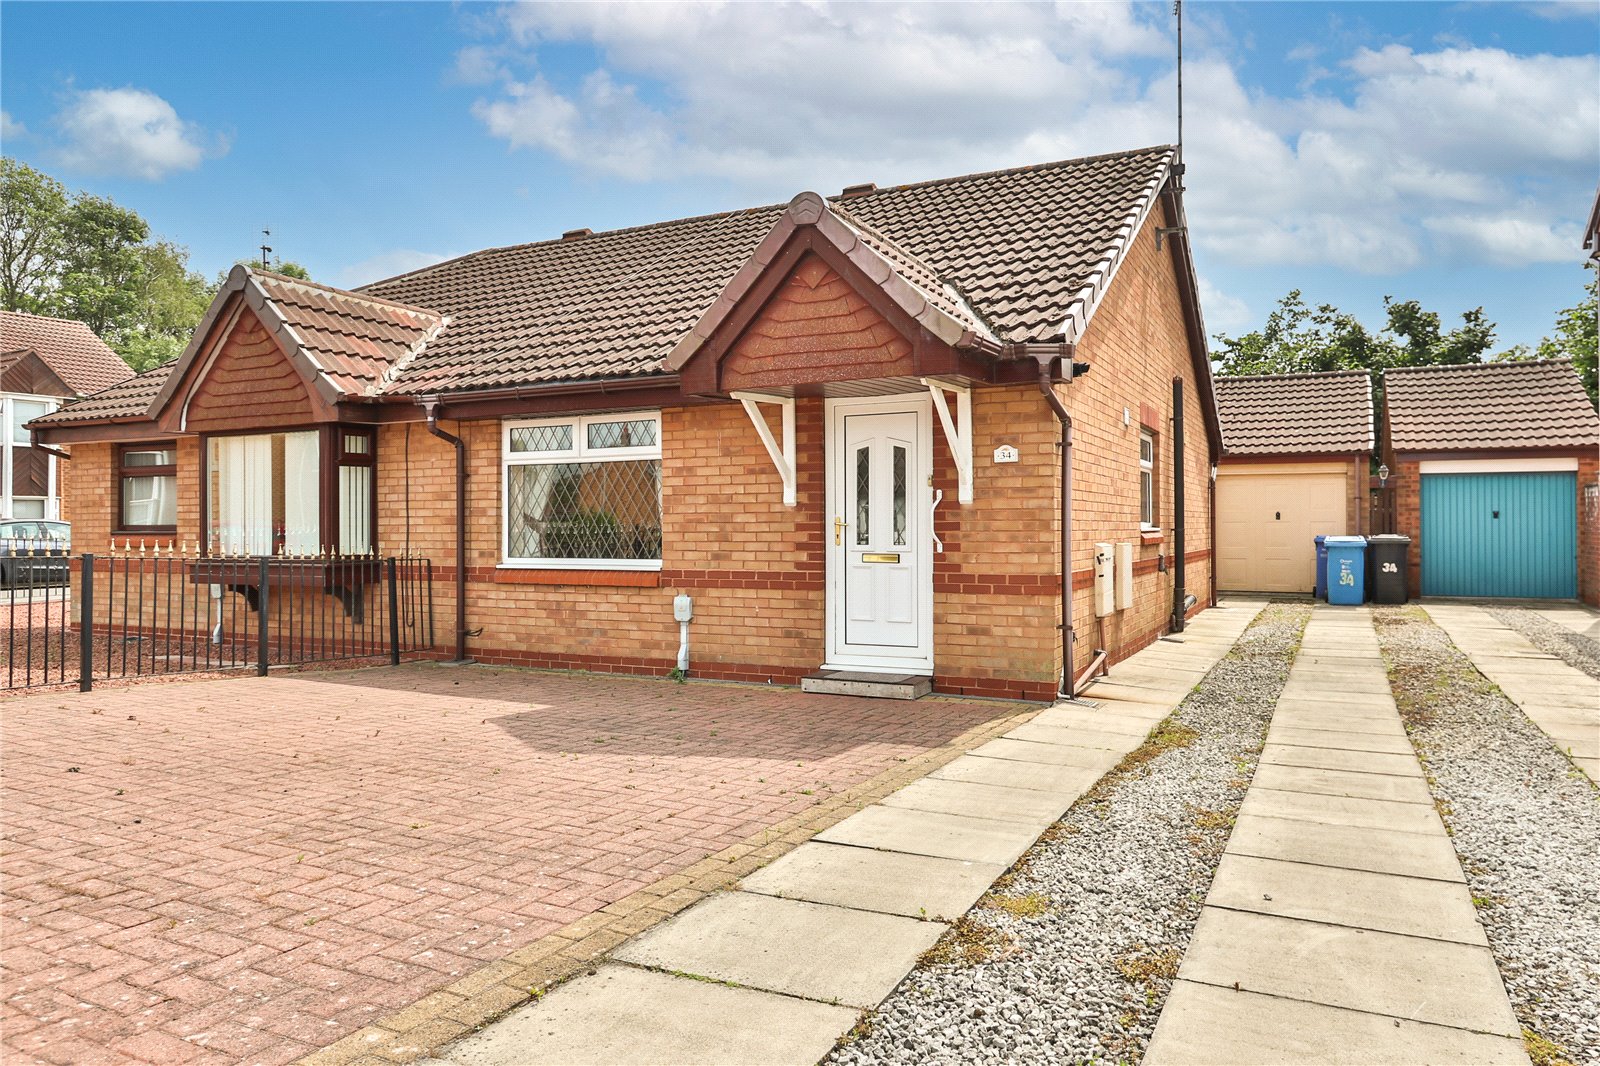 2 bed bungalow for sale in Shropshire Close, Hull, HU5 